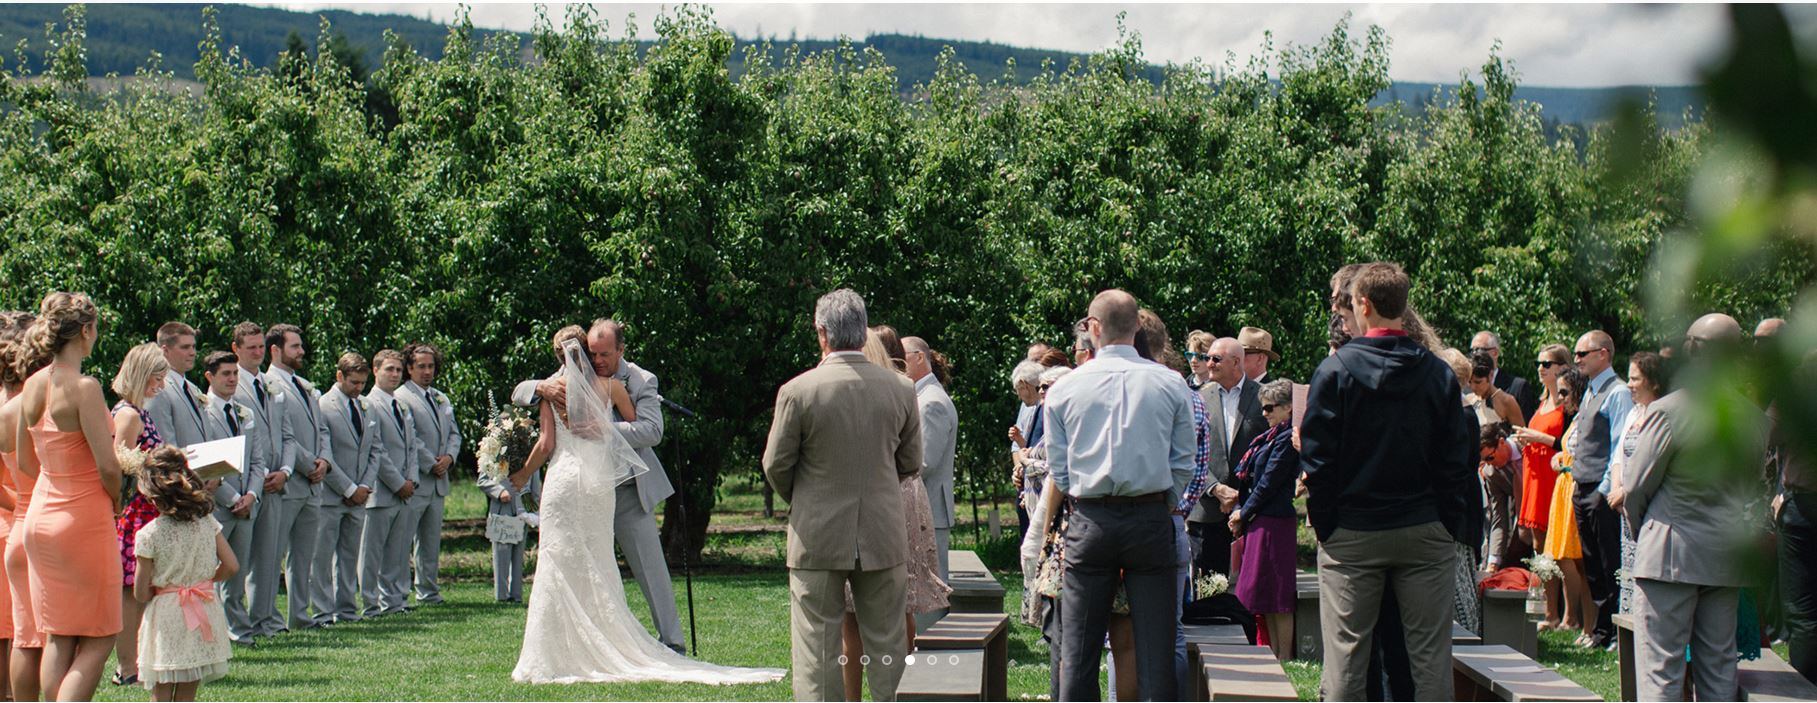 Mt View Orchards Weddings - 3